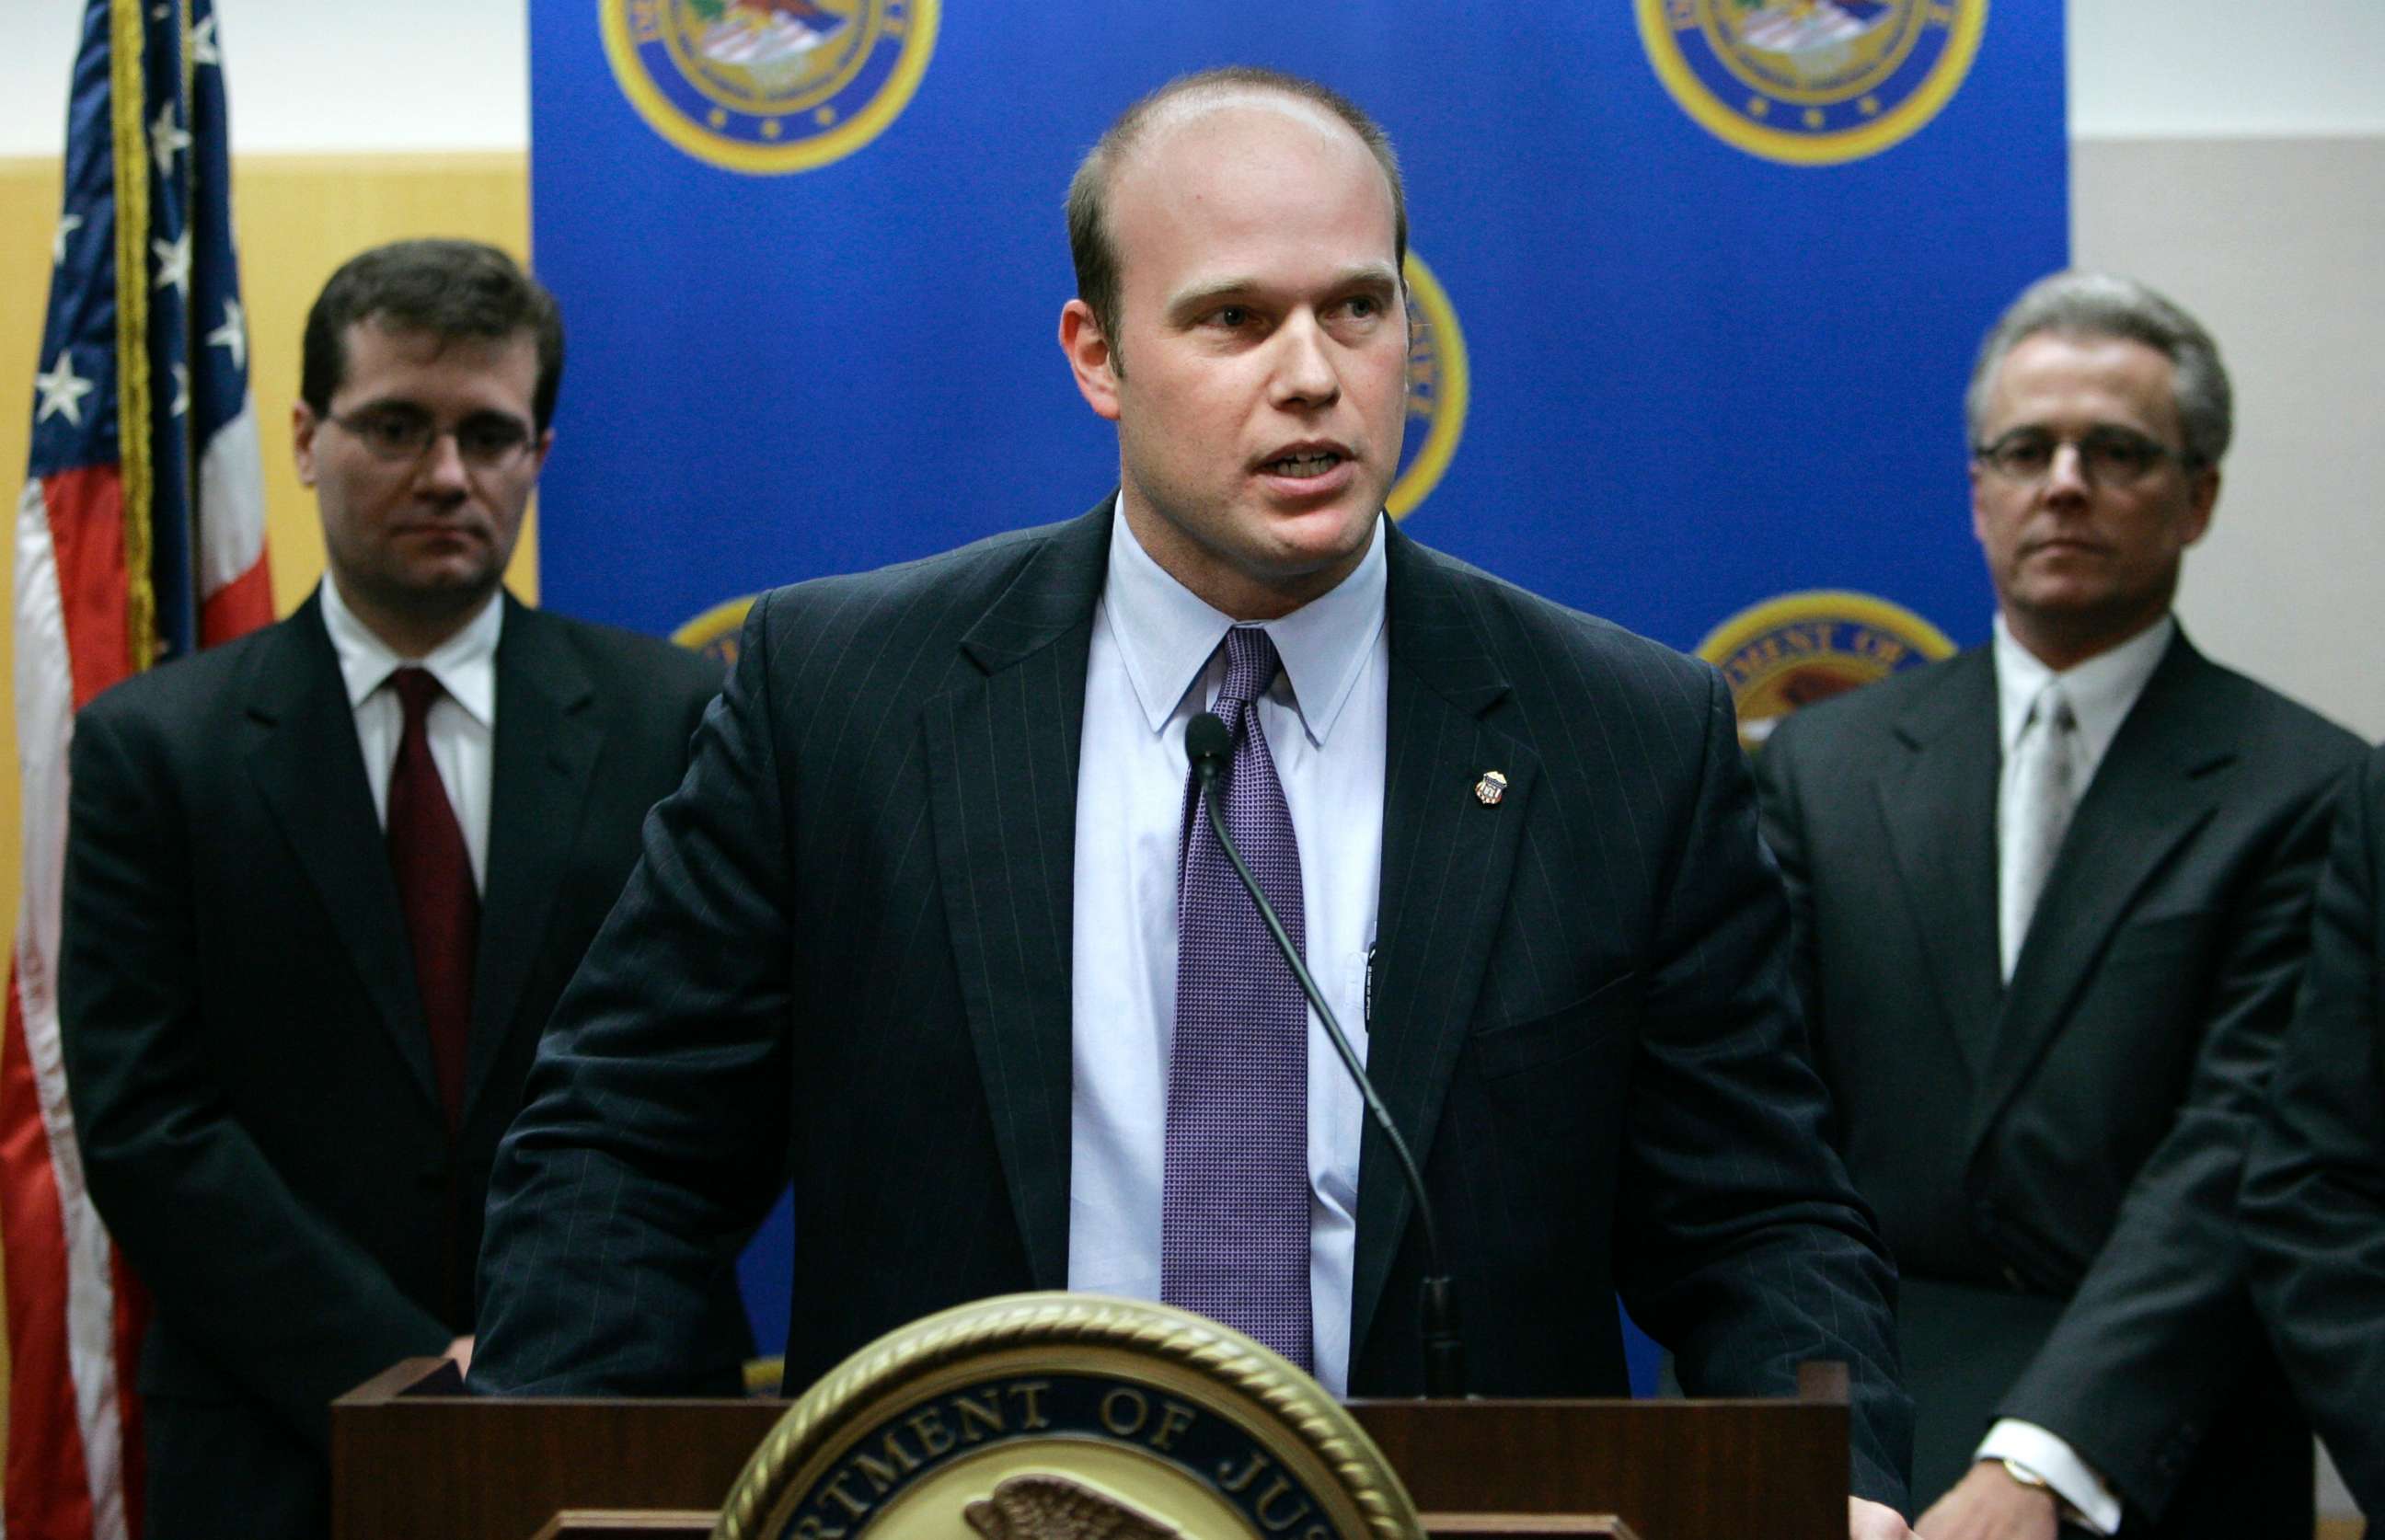 PHOTO: U.S. Attorney Matthew Whitaker speaks during a news conference, Jan. 16, 2007, in Des Moines, Iowa.